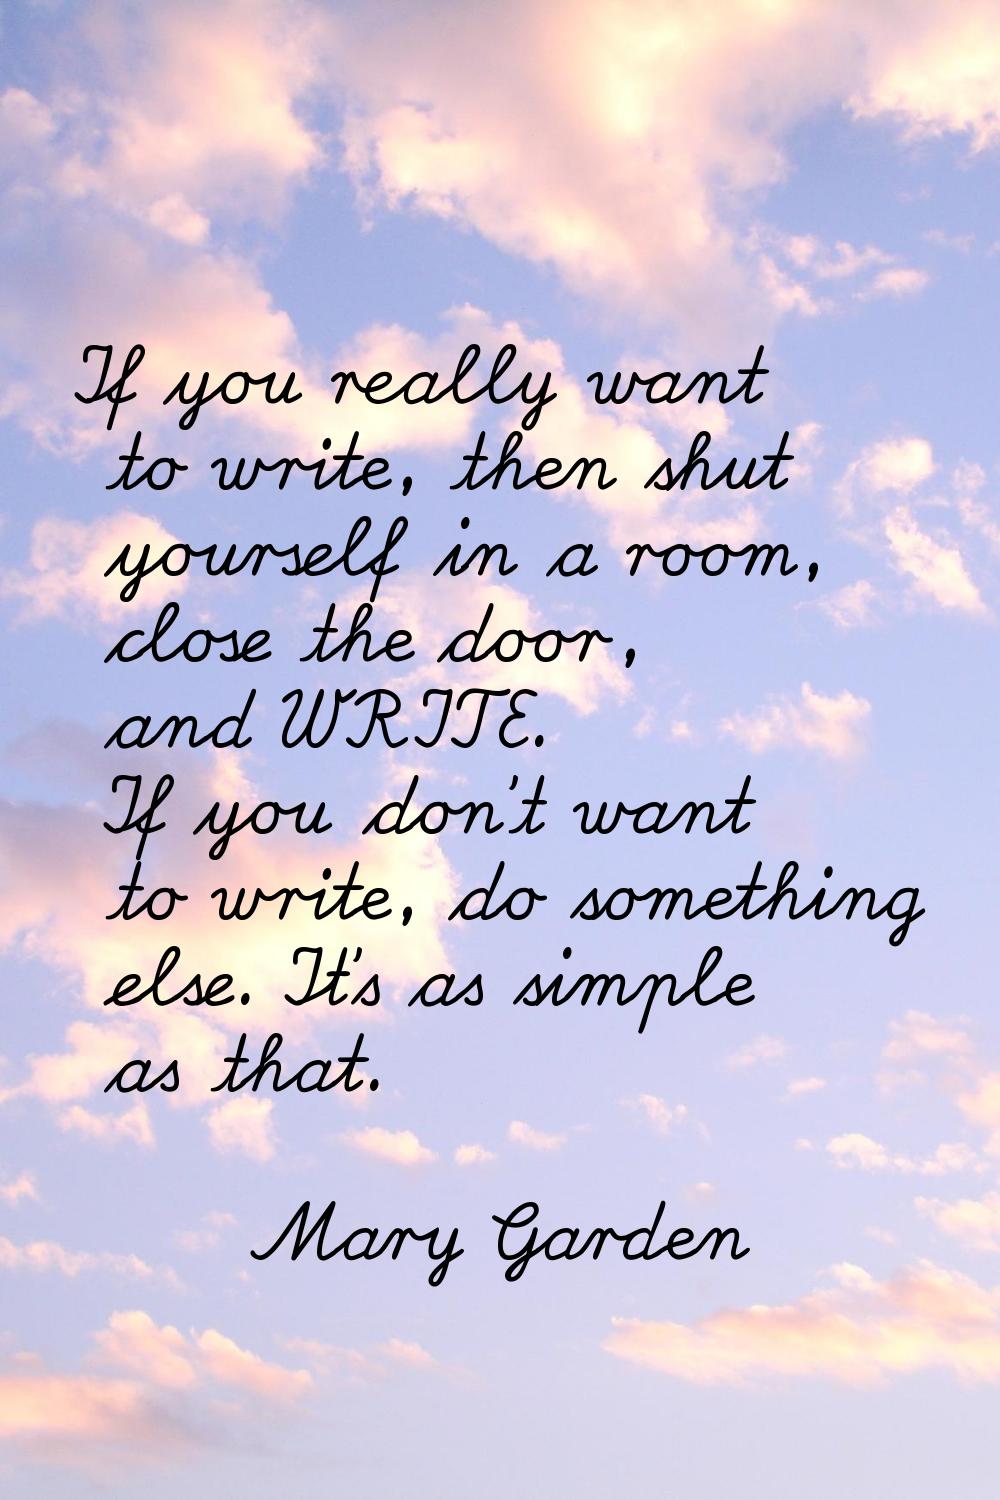 If you really want to write, then shut yourself in a room, close the door, and WRITE. If you don't 